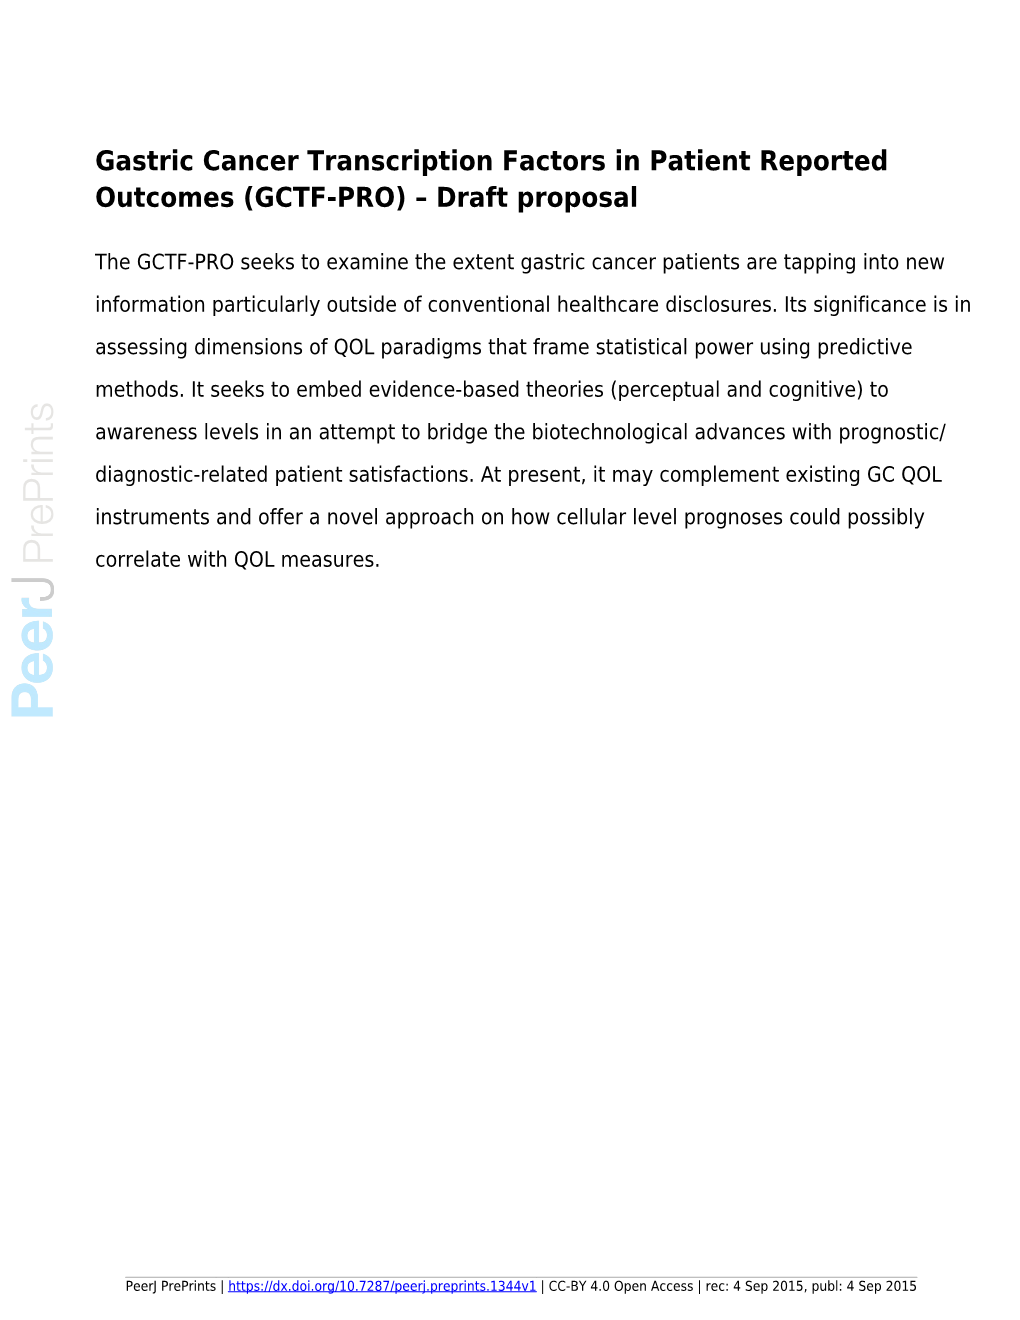 Gastric Cancer Transcription Factors in Patient Reported Outcomes (GCTF-PRO) – Draft Proposal